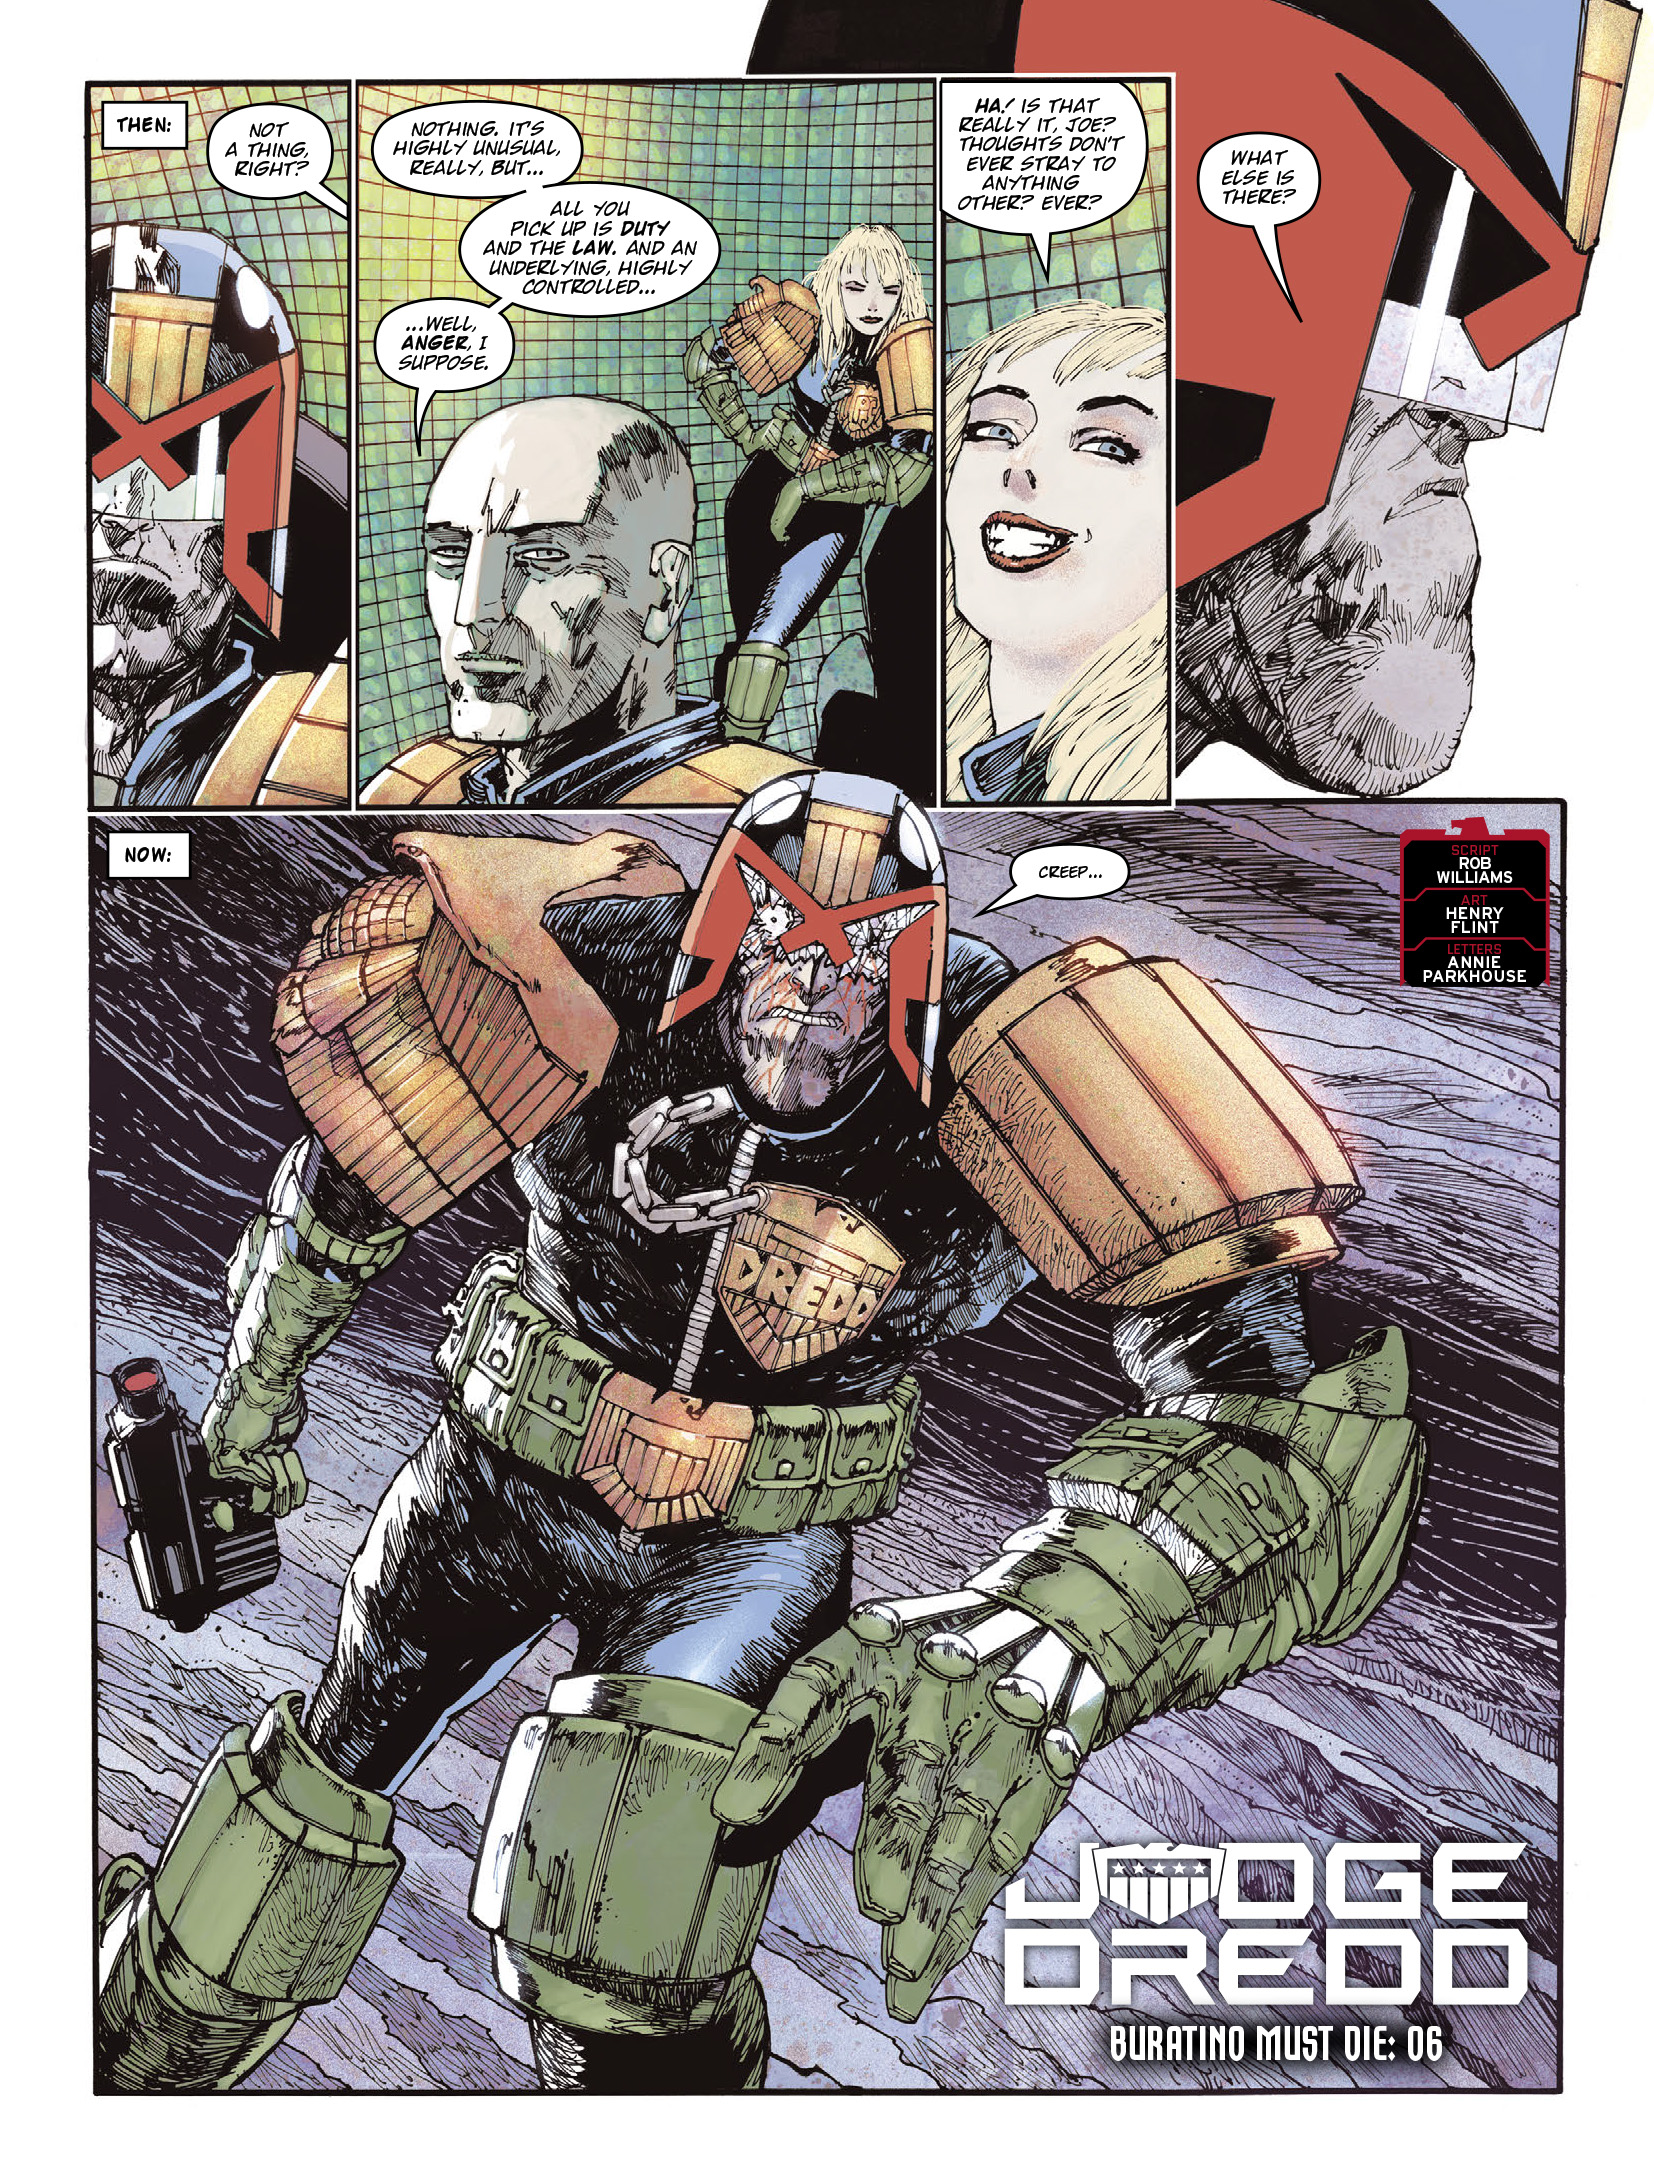 2000 AD: Chapter 2309 - Page 3